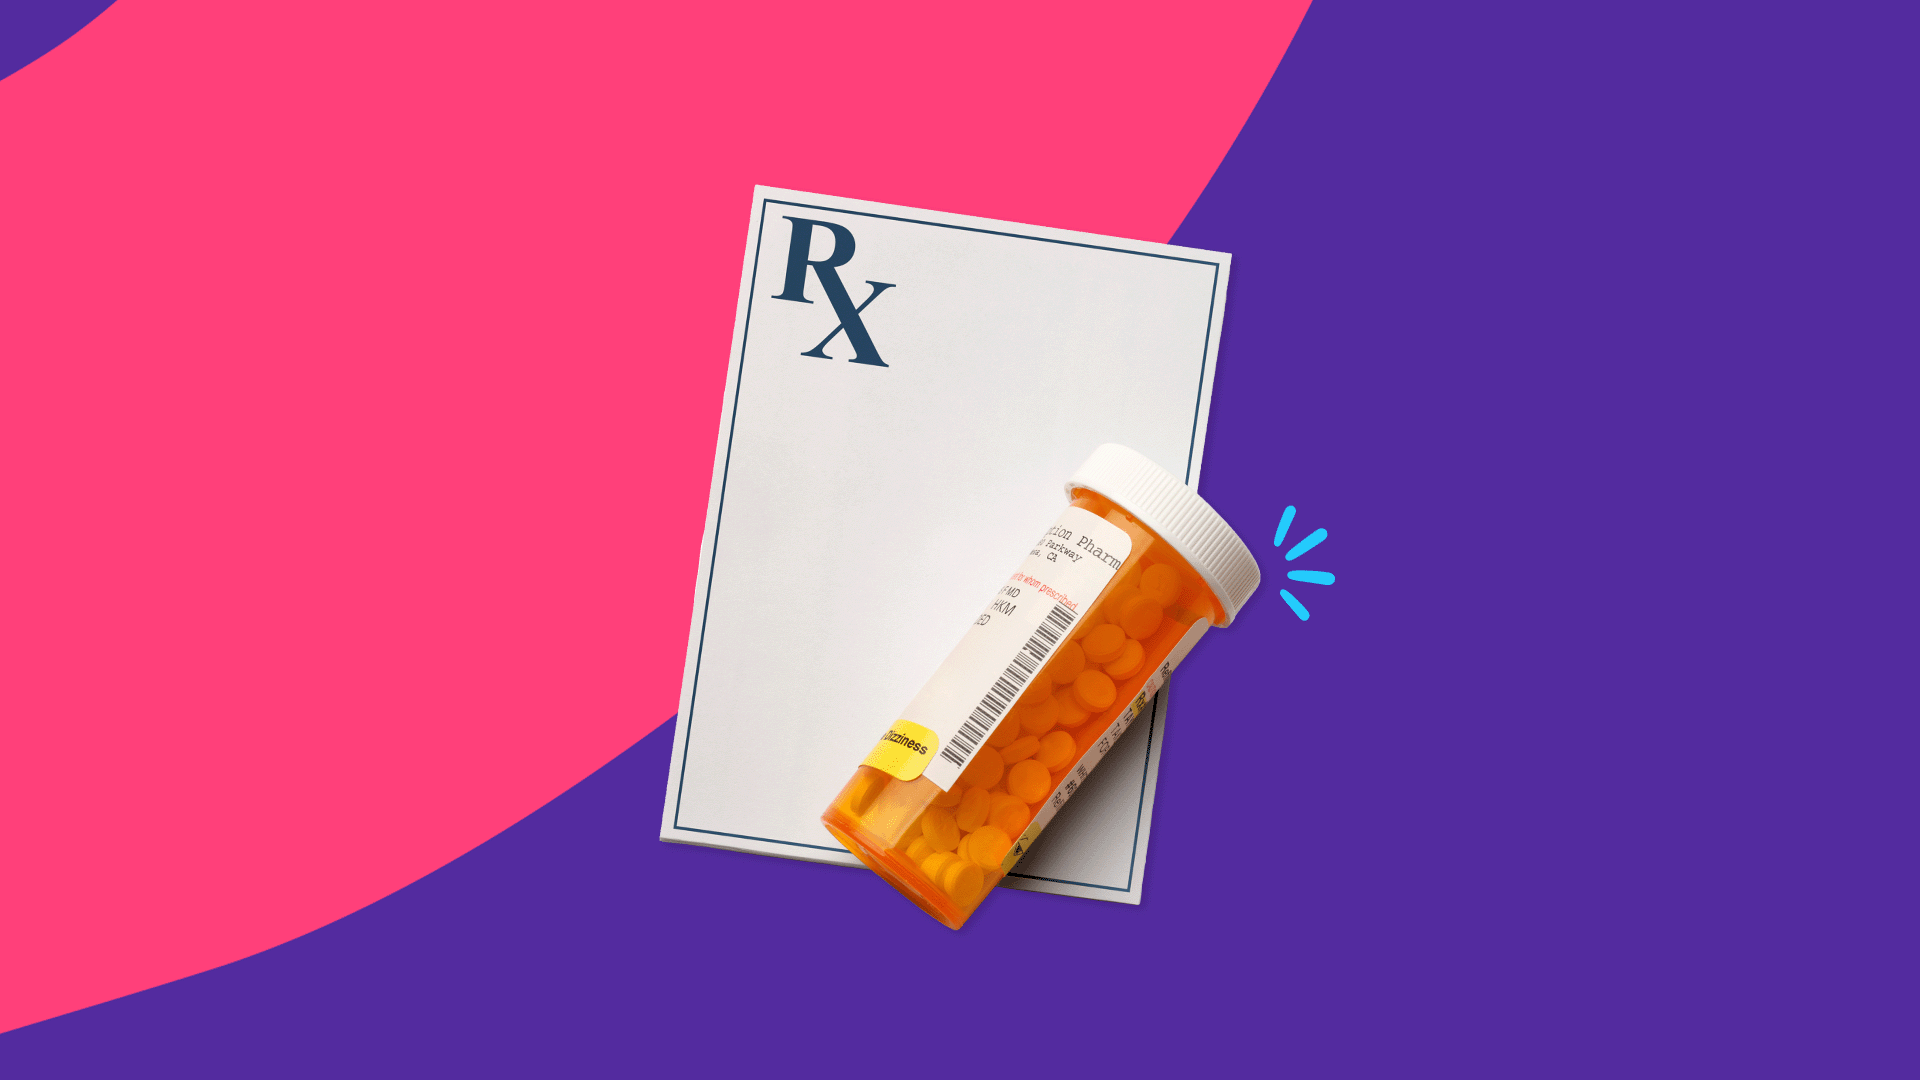 Rx pill bottle and prescription pad: Is atorvastatin a blood thinner?